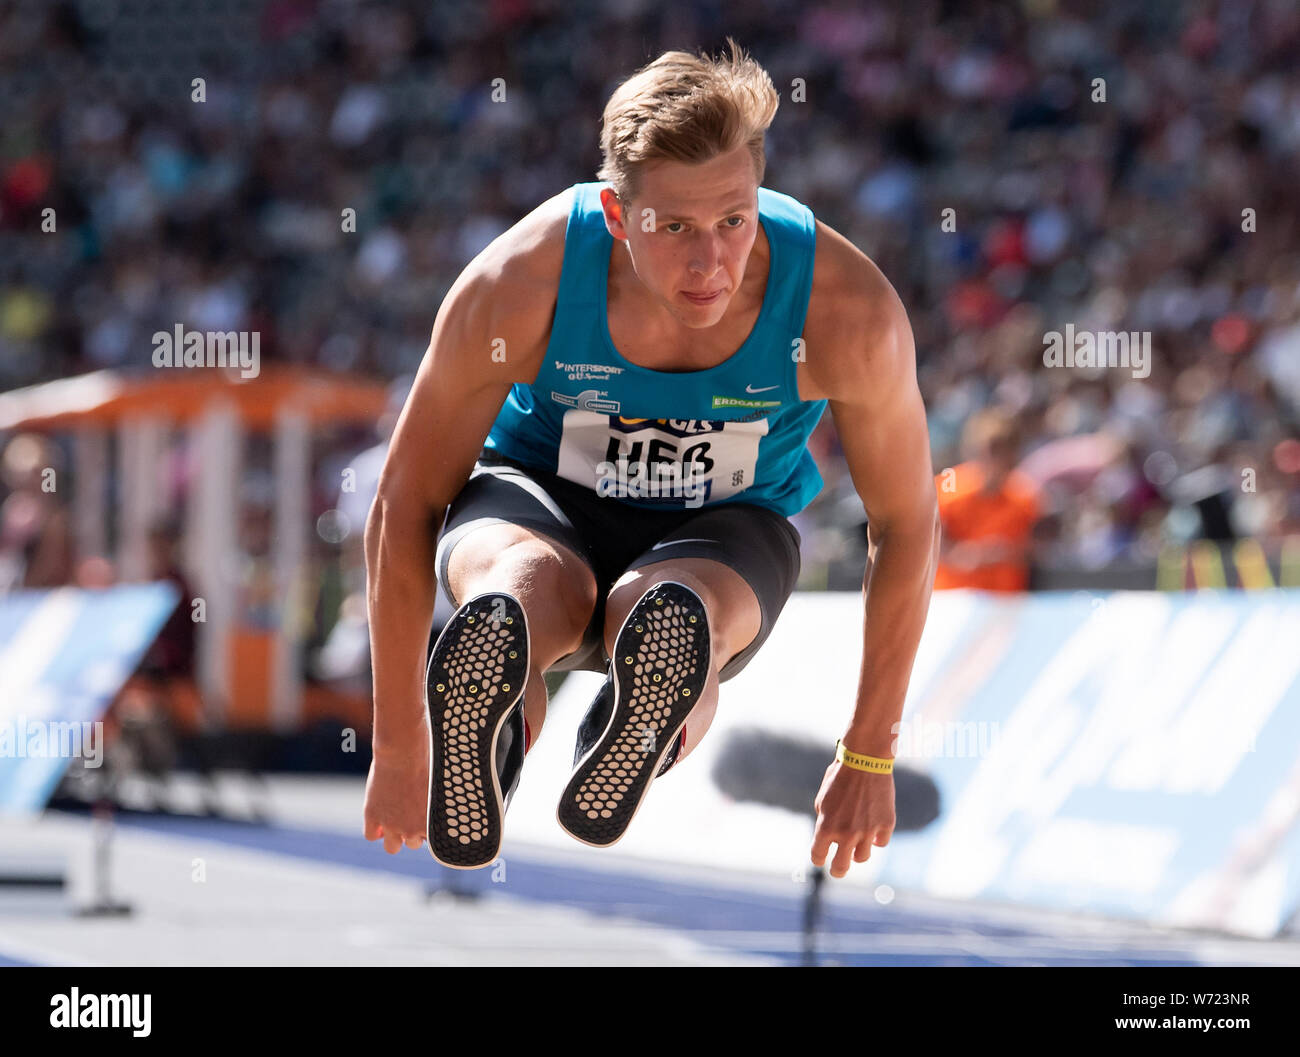 Jumps Finale High Resolution Stock Photography and Images - Alamy